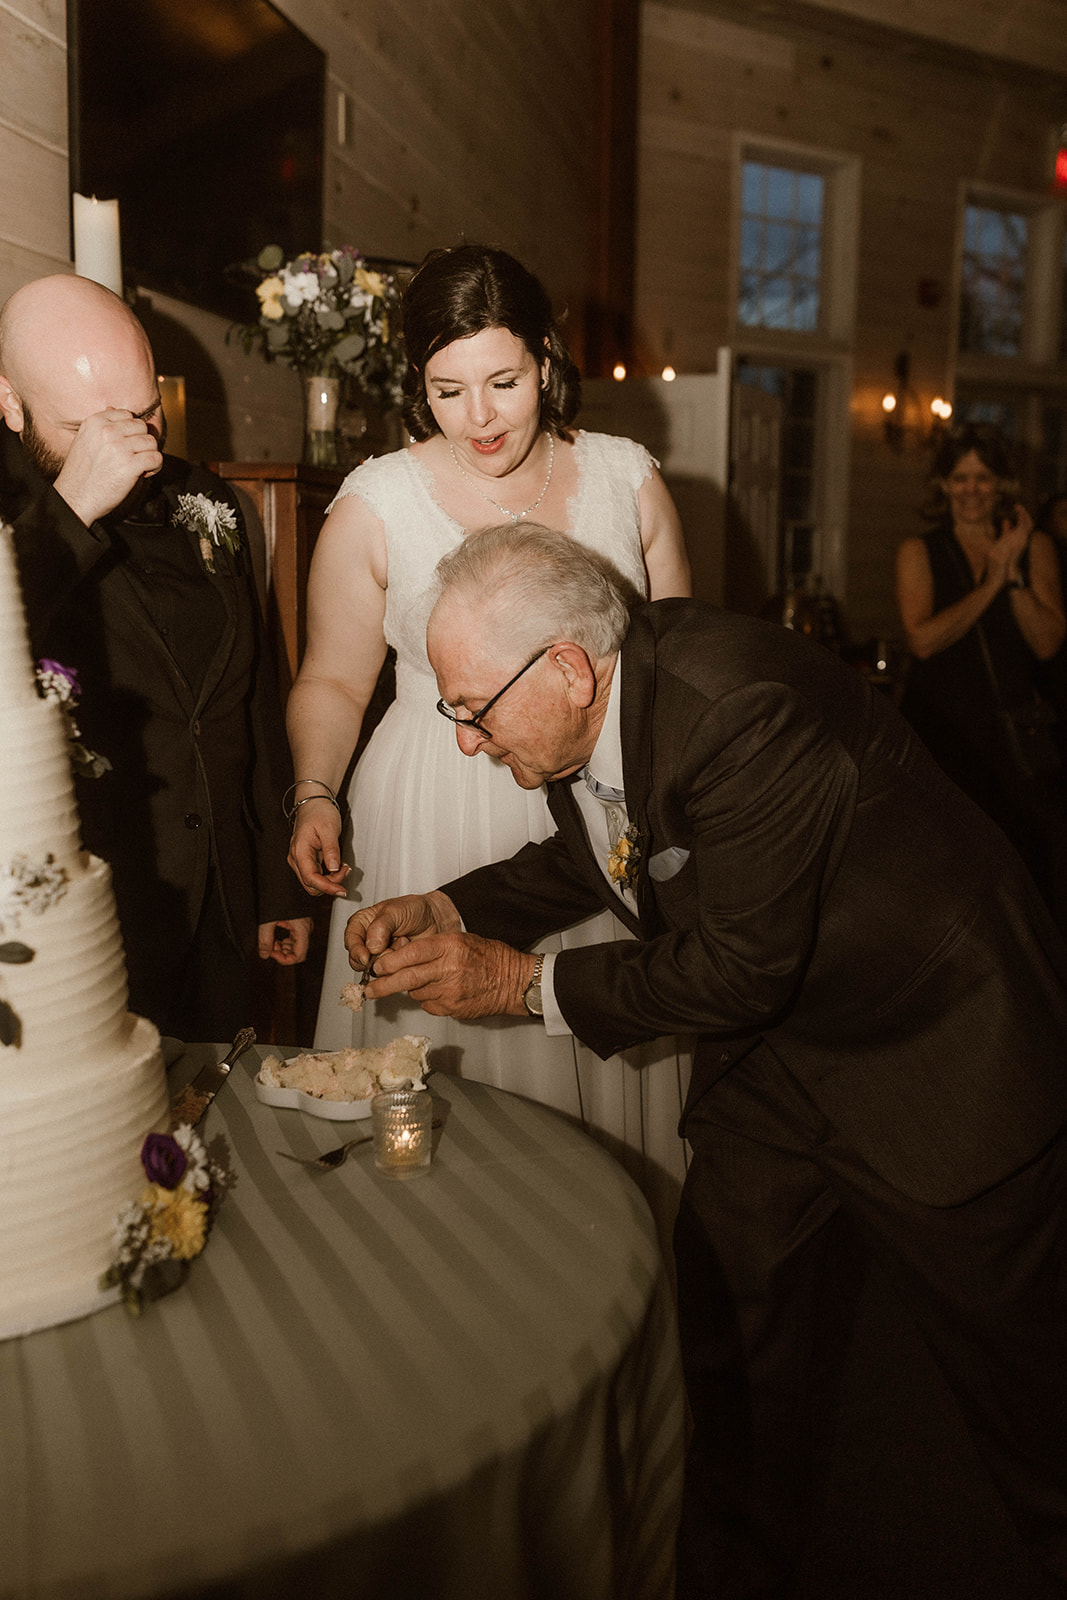 Wedding guest helps bride with her piece of cake during her dreamy wedding day